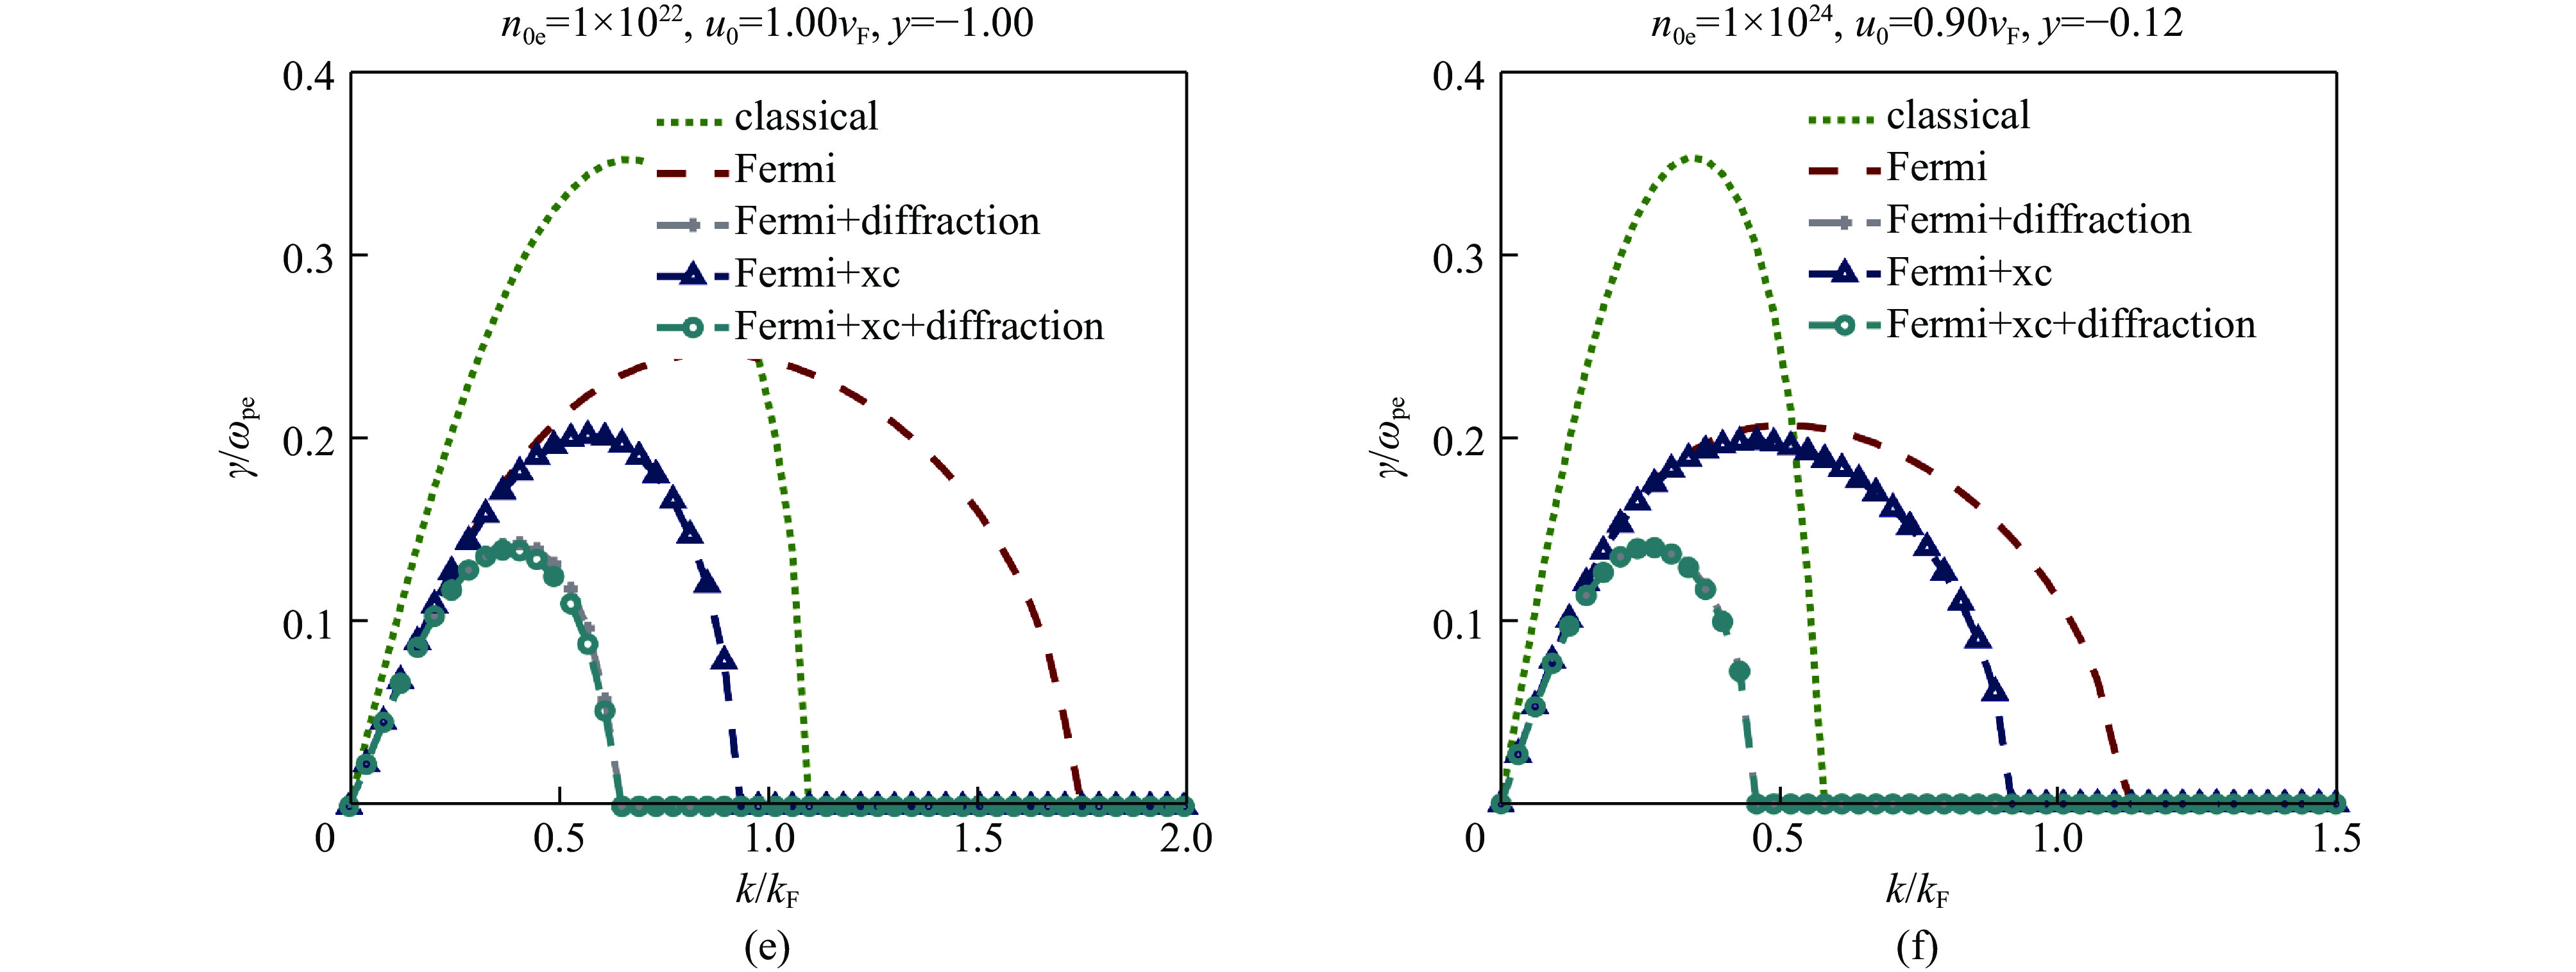 Growth rates of different conditions at different countering drift, with the density unit of . The values of y depends on the selection of xc potentials[21]，. The ‘classical’ curves represent the instability rates of the classical plasma model at 0 T不同条件下的增长率对比，其中密度单位为, y值的确定依据交换关联势的选取，，“classical”曲线代表零温下经典等离子体模型的不稳定性增长率